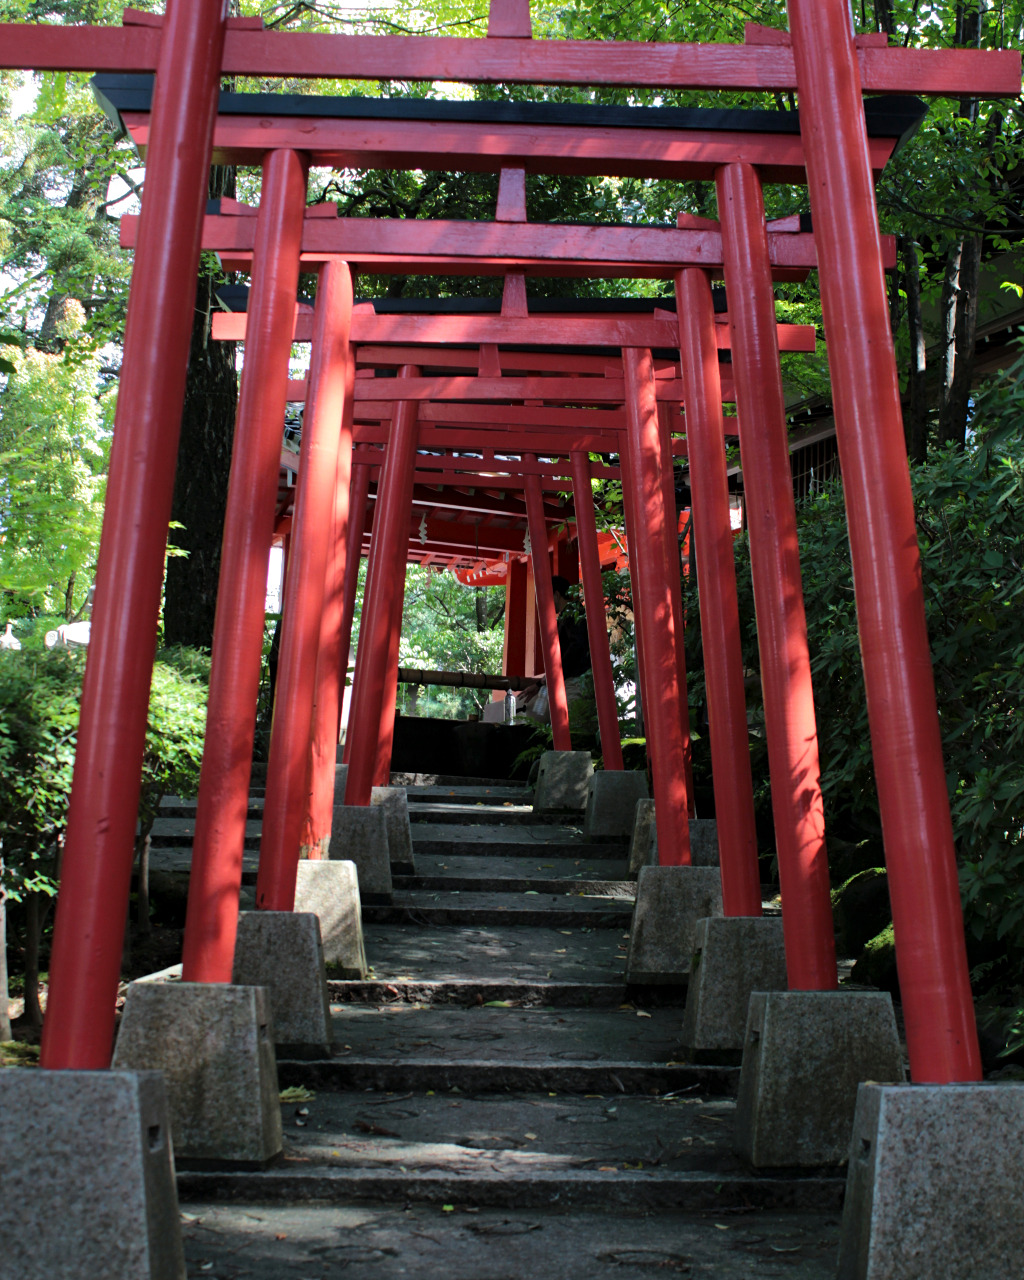 Pass under the eight torii gates of Kanazawa Shrine on the way to the sacred well for luck.